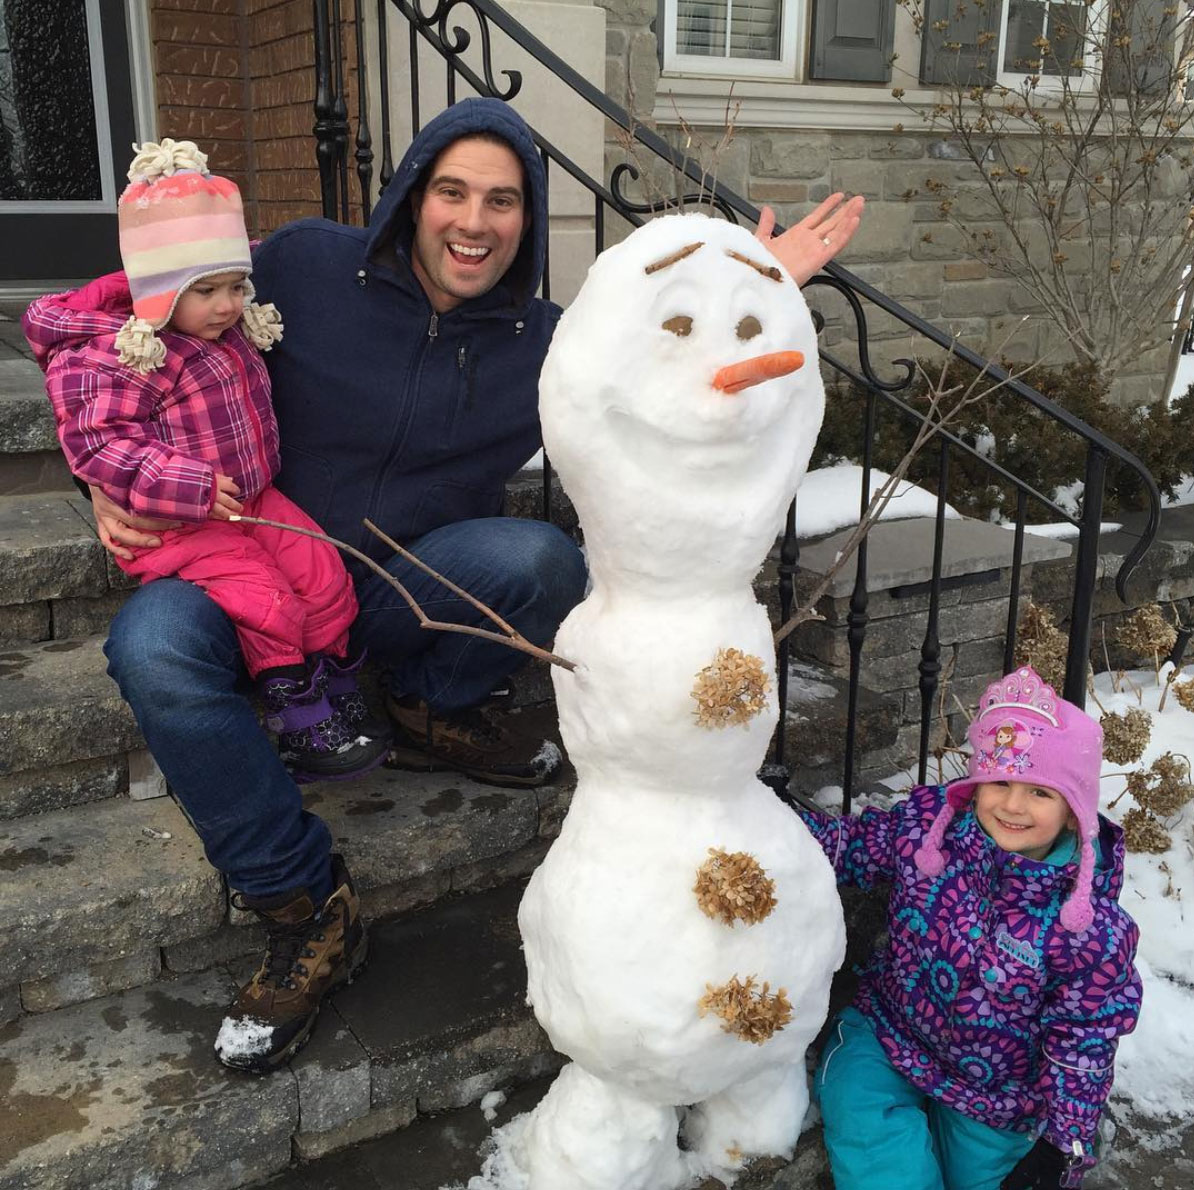 Scott McGillivray building an Olaf snowman with daughters